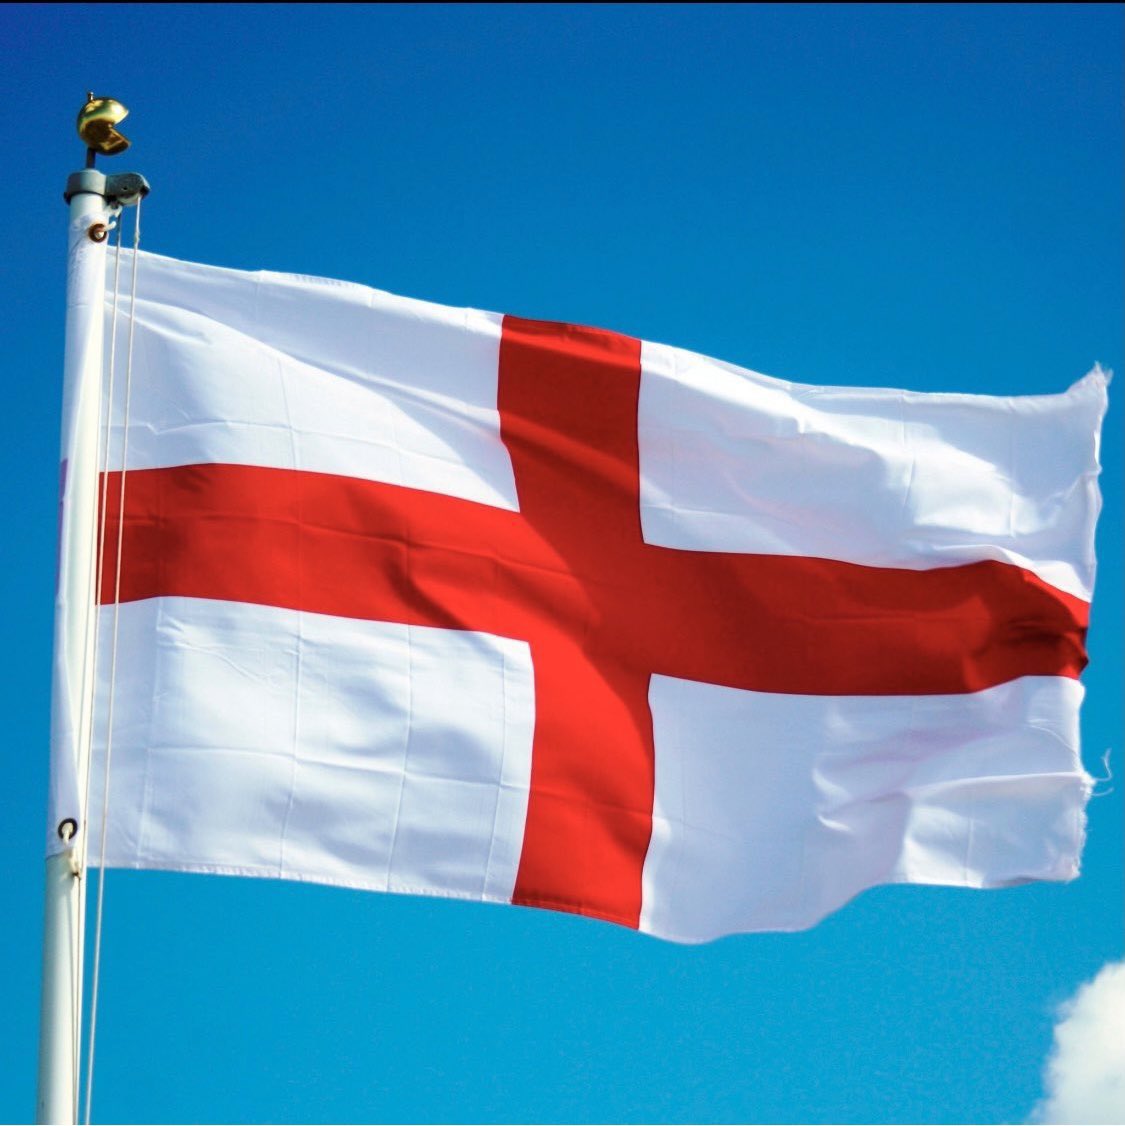 Happy #StGeorgesDay to all our followers, customers and staff 🏴󠁧󠁢󠁥󠁮󠁧󠁿from all of us here in the #EnglishRiviera